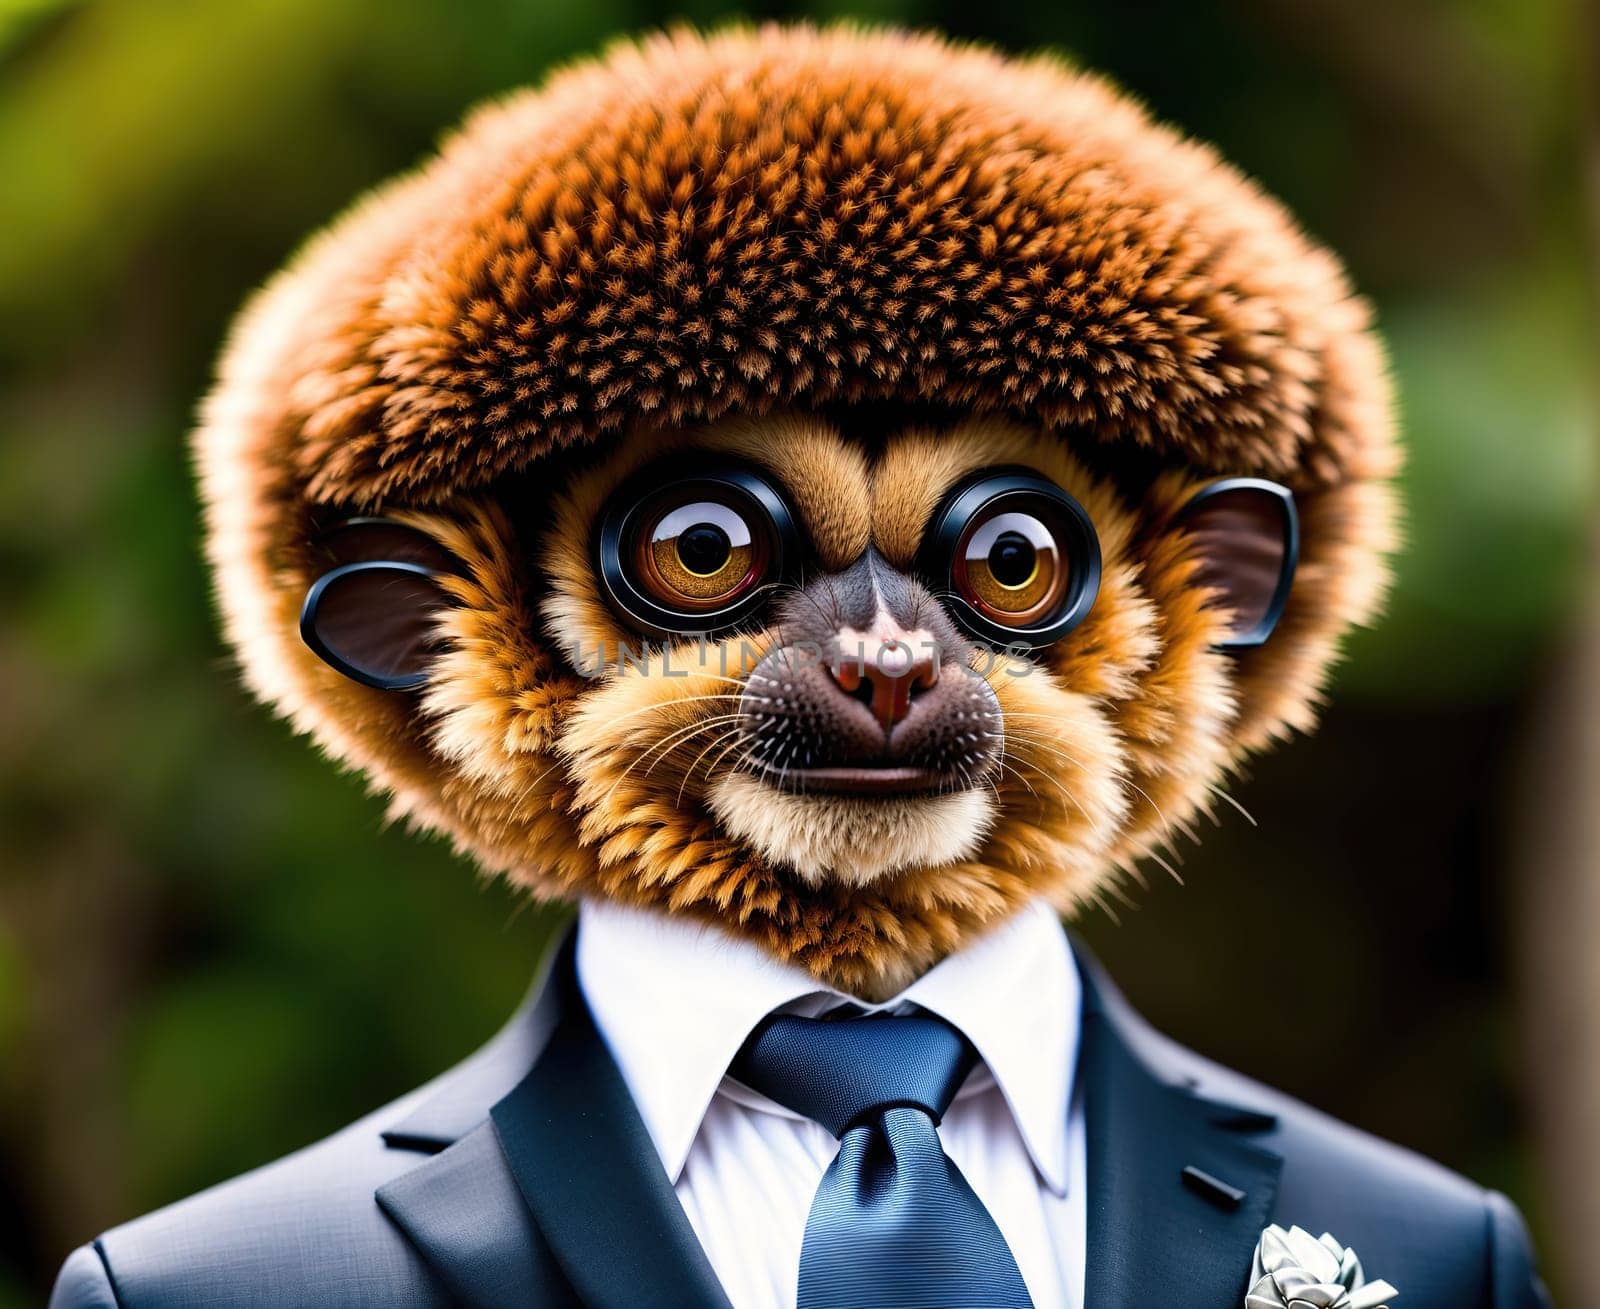 The image shows a monkey wearing a suit and tie, with a serious expression on its face.